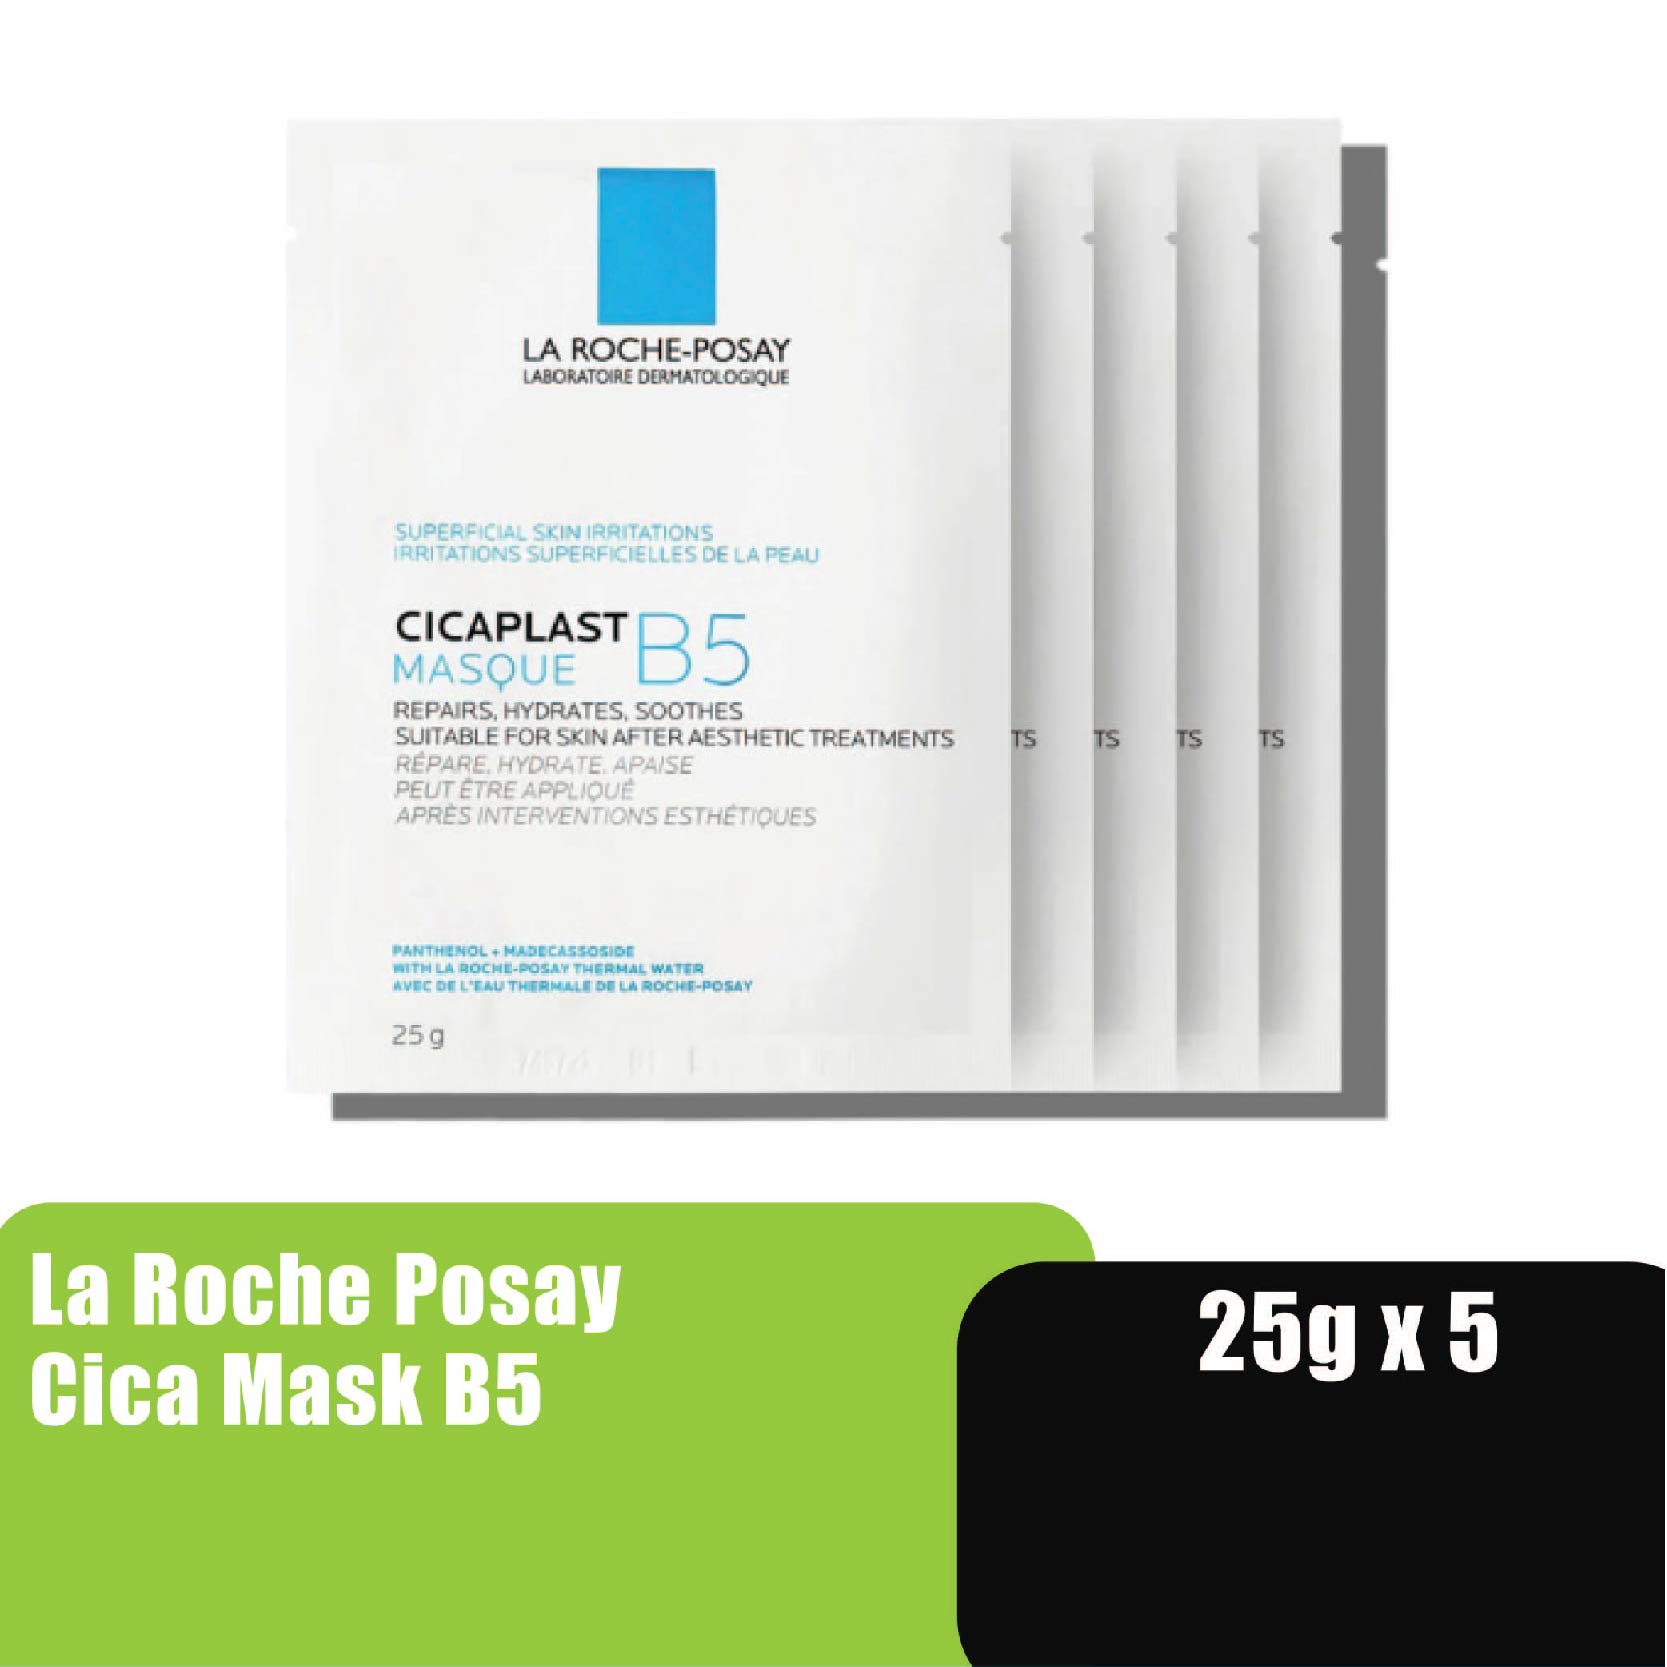 LA ROCHE POSAY Cicaplast Masque B5 Facial Mask 25G x 5's - Hydrating & Soothing Mask For Sensitive Skin 保湿面膜